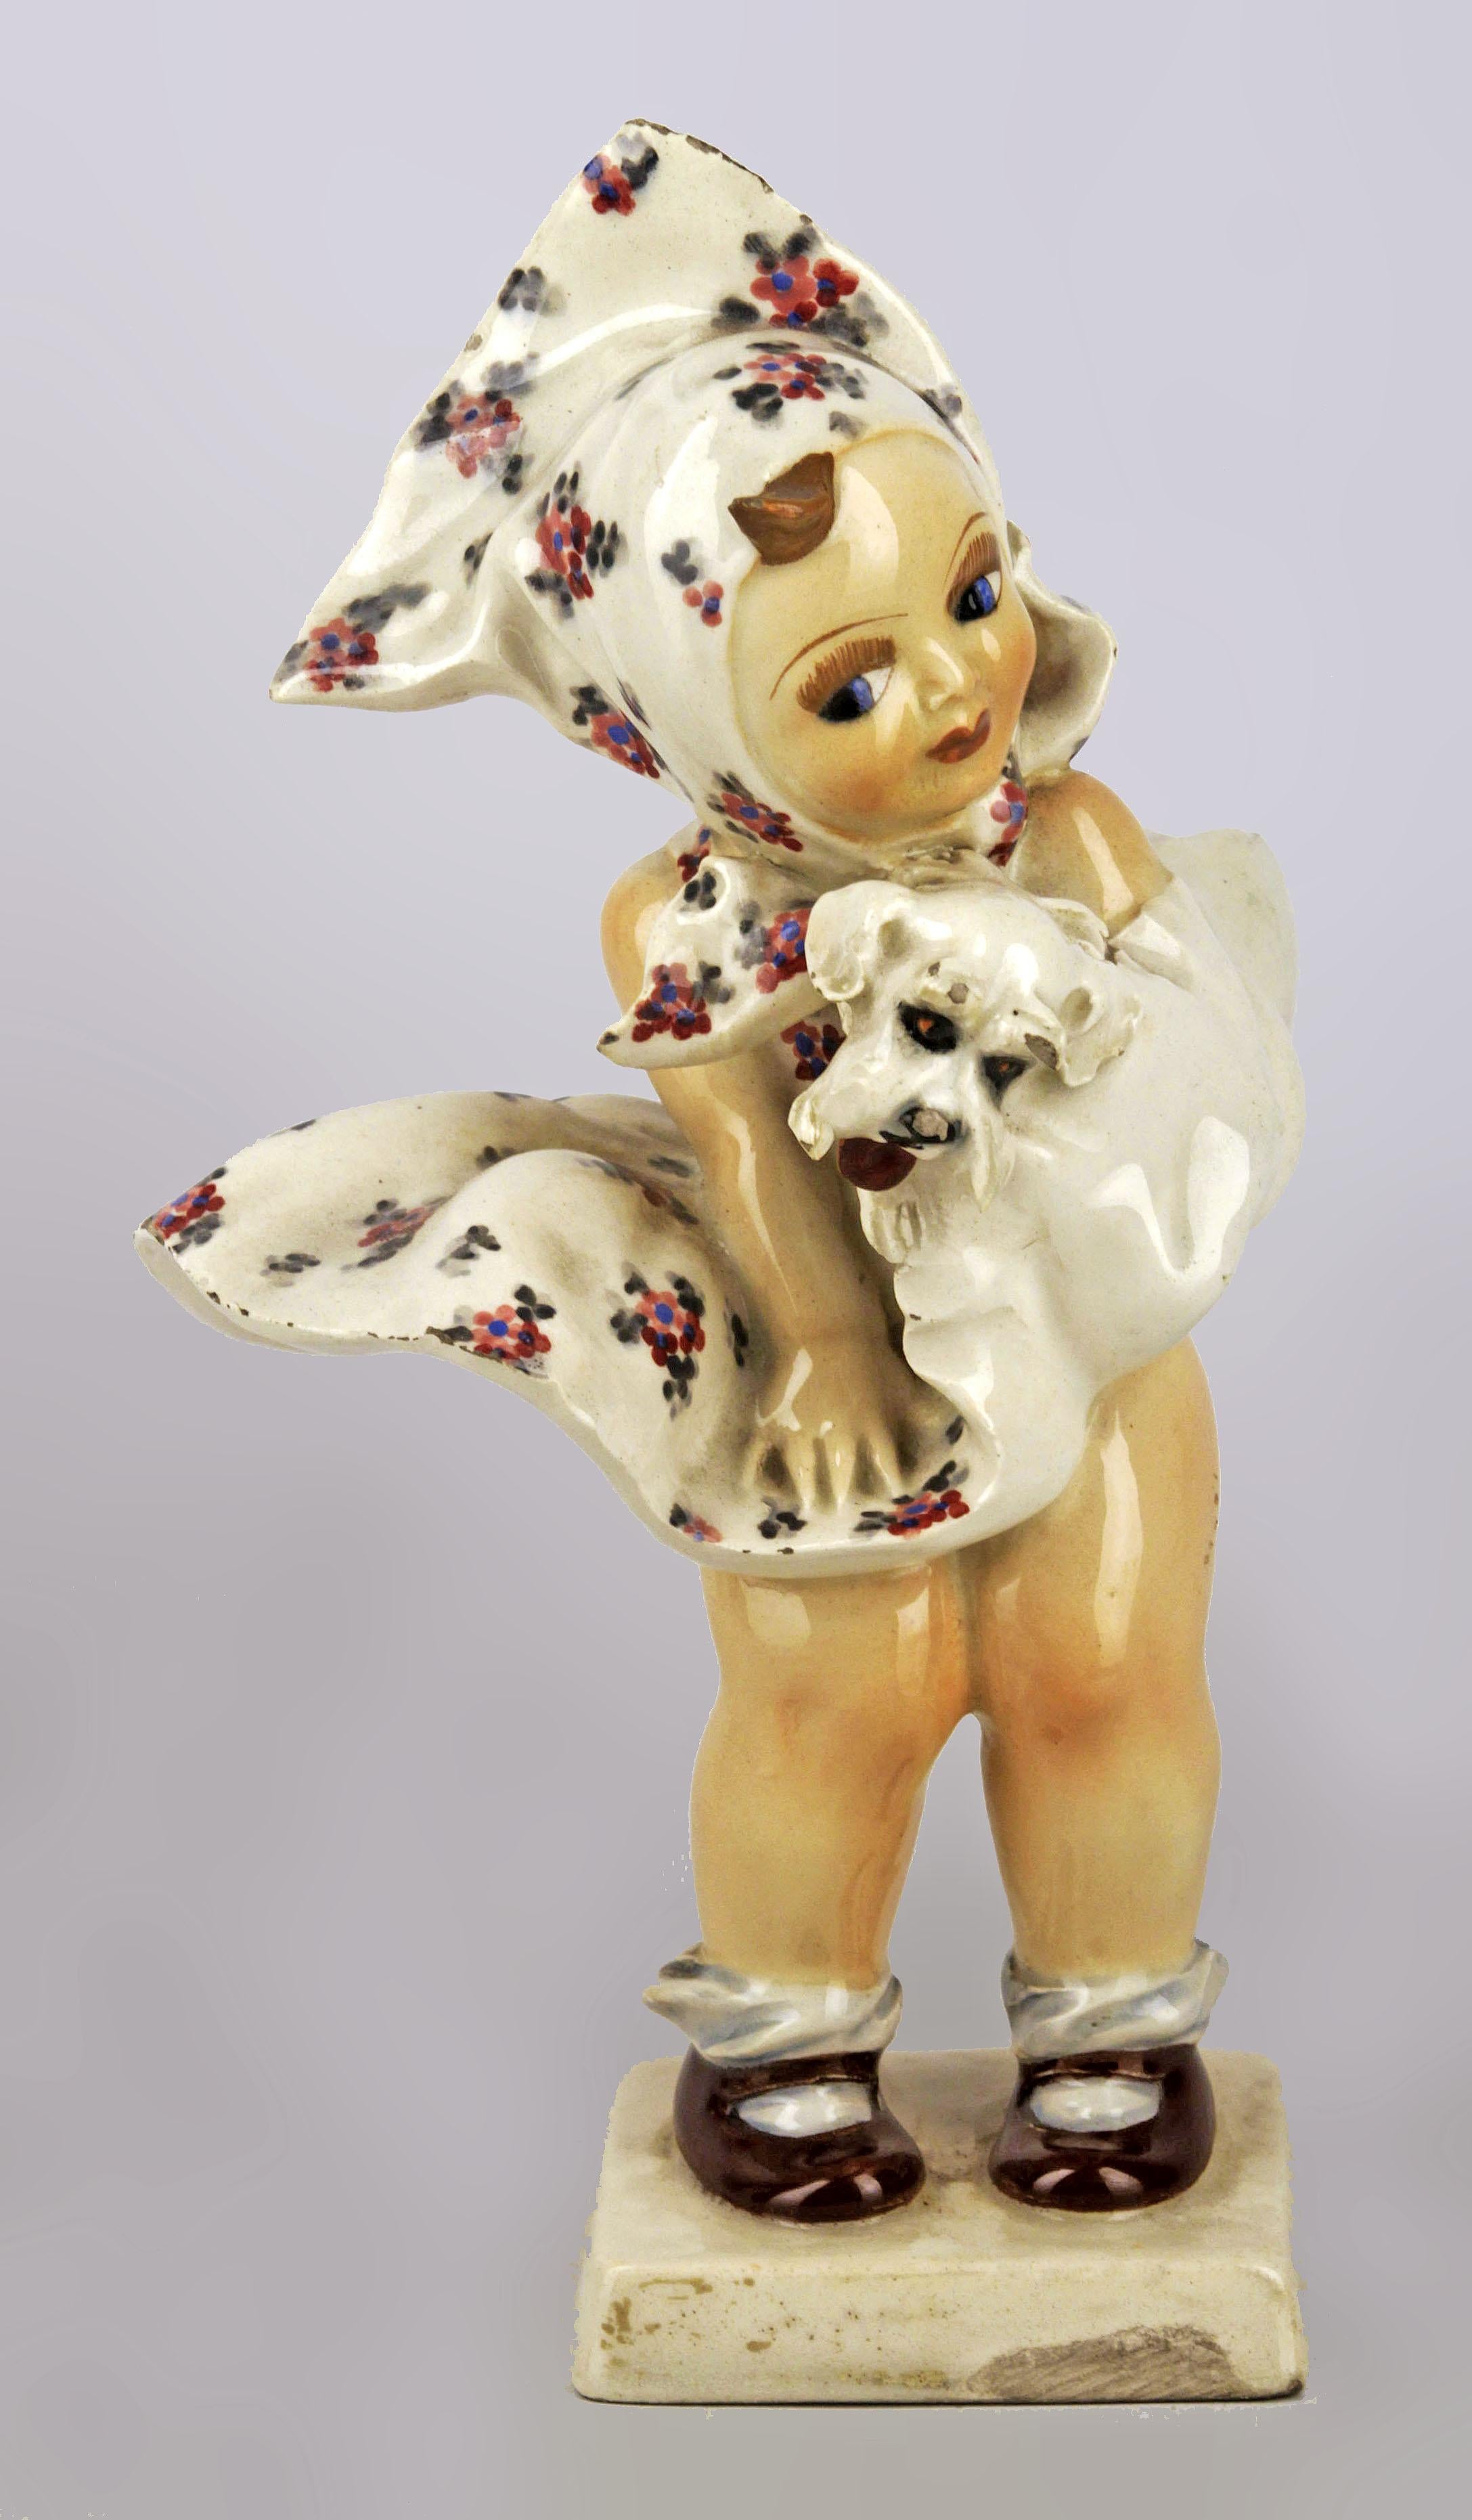 1950s italian Torino hand-painted glazed ceramic sculpture of a girl with dress and dog signed by C. Mollica

By: C. Mollica
Material: ceramic, paint
Technique: molded, pressed, painted, hand-painted, glazed
Dimensions: 5 in x 6 in x 10 in
Date: